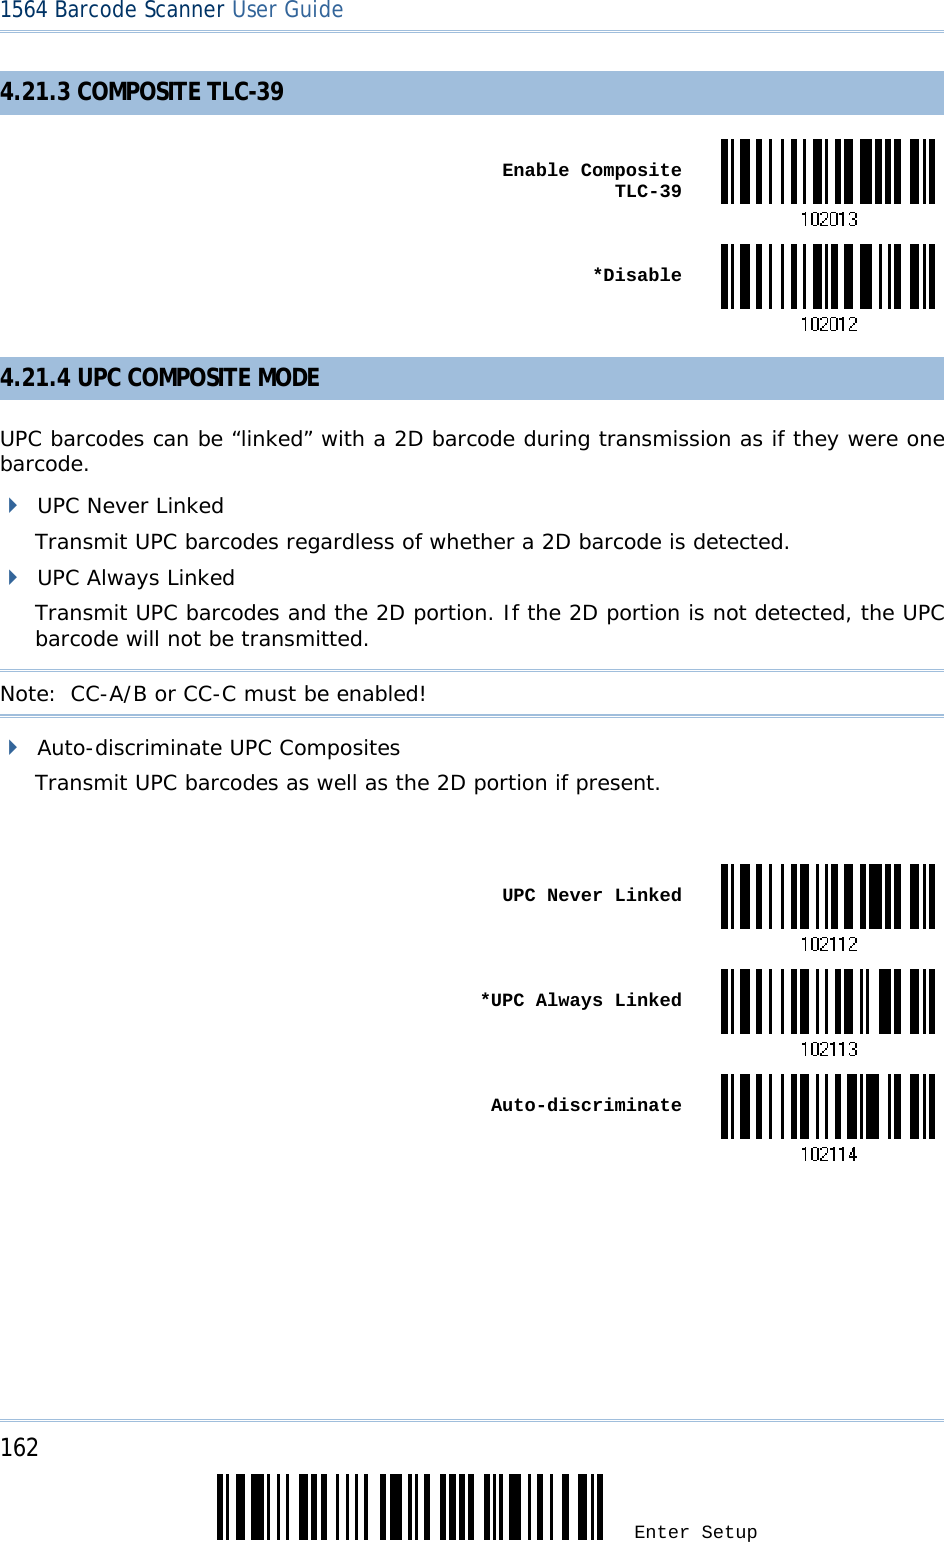 162 Enter Setup 1564 Barcode Scanner User Guide  4.21.3 COMPOSITE TLC-39  Enable Composite TLC-39 *Disable4.21.4 UPC COMPOSITE MODE UPC barcodes can be “linked” with a 2D barcode during transmission as if they were one barcode.  UPC Never Linked Transmit UPC barcodes regardless of whether a 2D barcode is detected.  UPC Always Linked Transmit UPC barcodes and the 2D portion. If the 2D portion is not detected, the UPC barcode will not be transmitted. Note:  CC-A/B or CC-C must be enabled!  Auto-discriminate UPC Composites Transmit UPC barcodes as well as the 2D portion if present.   UPC Never Linked *UPC Always Linked Auto-discriminate